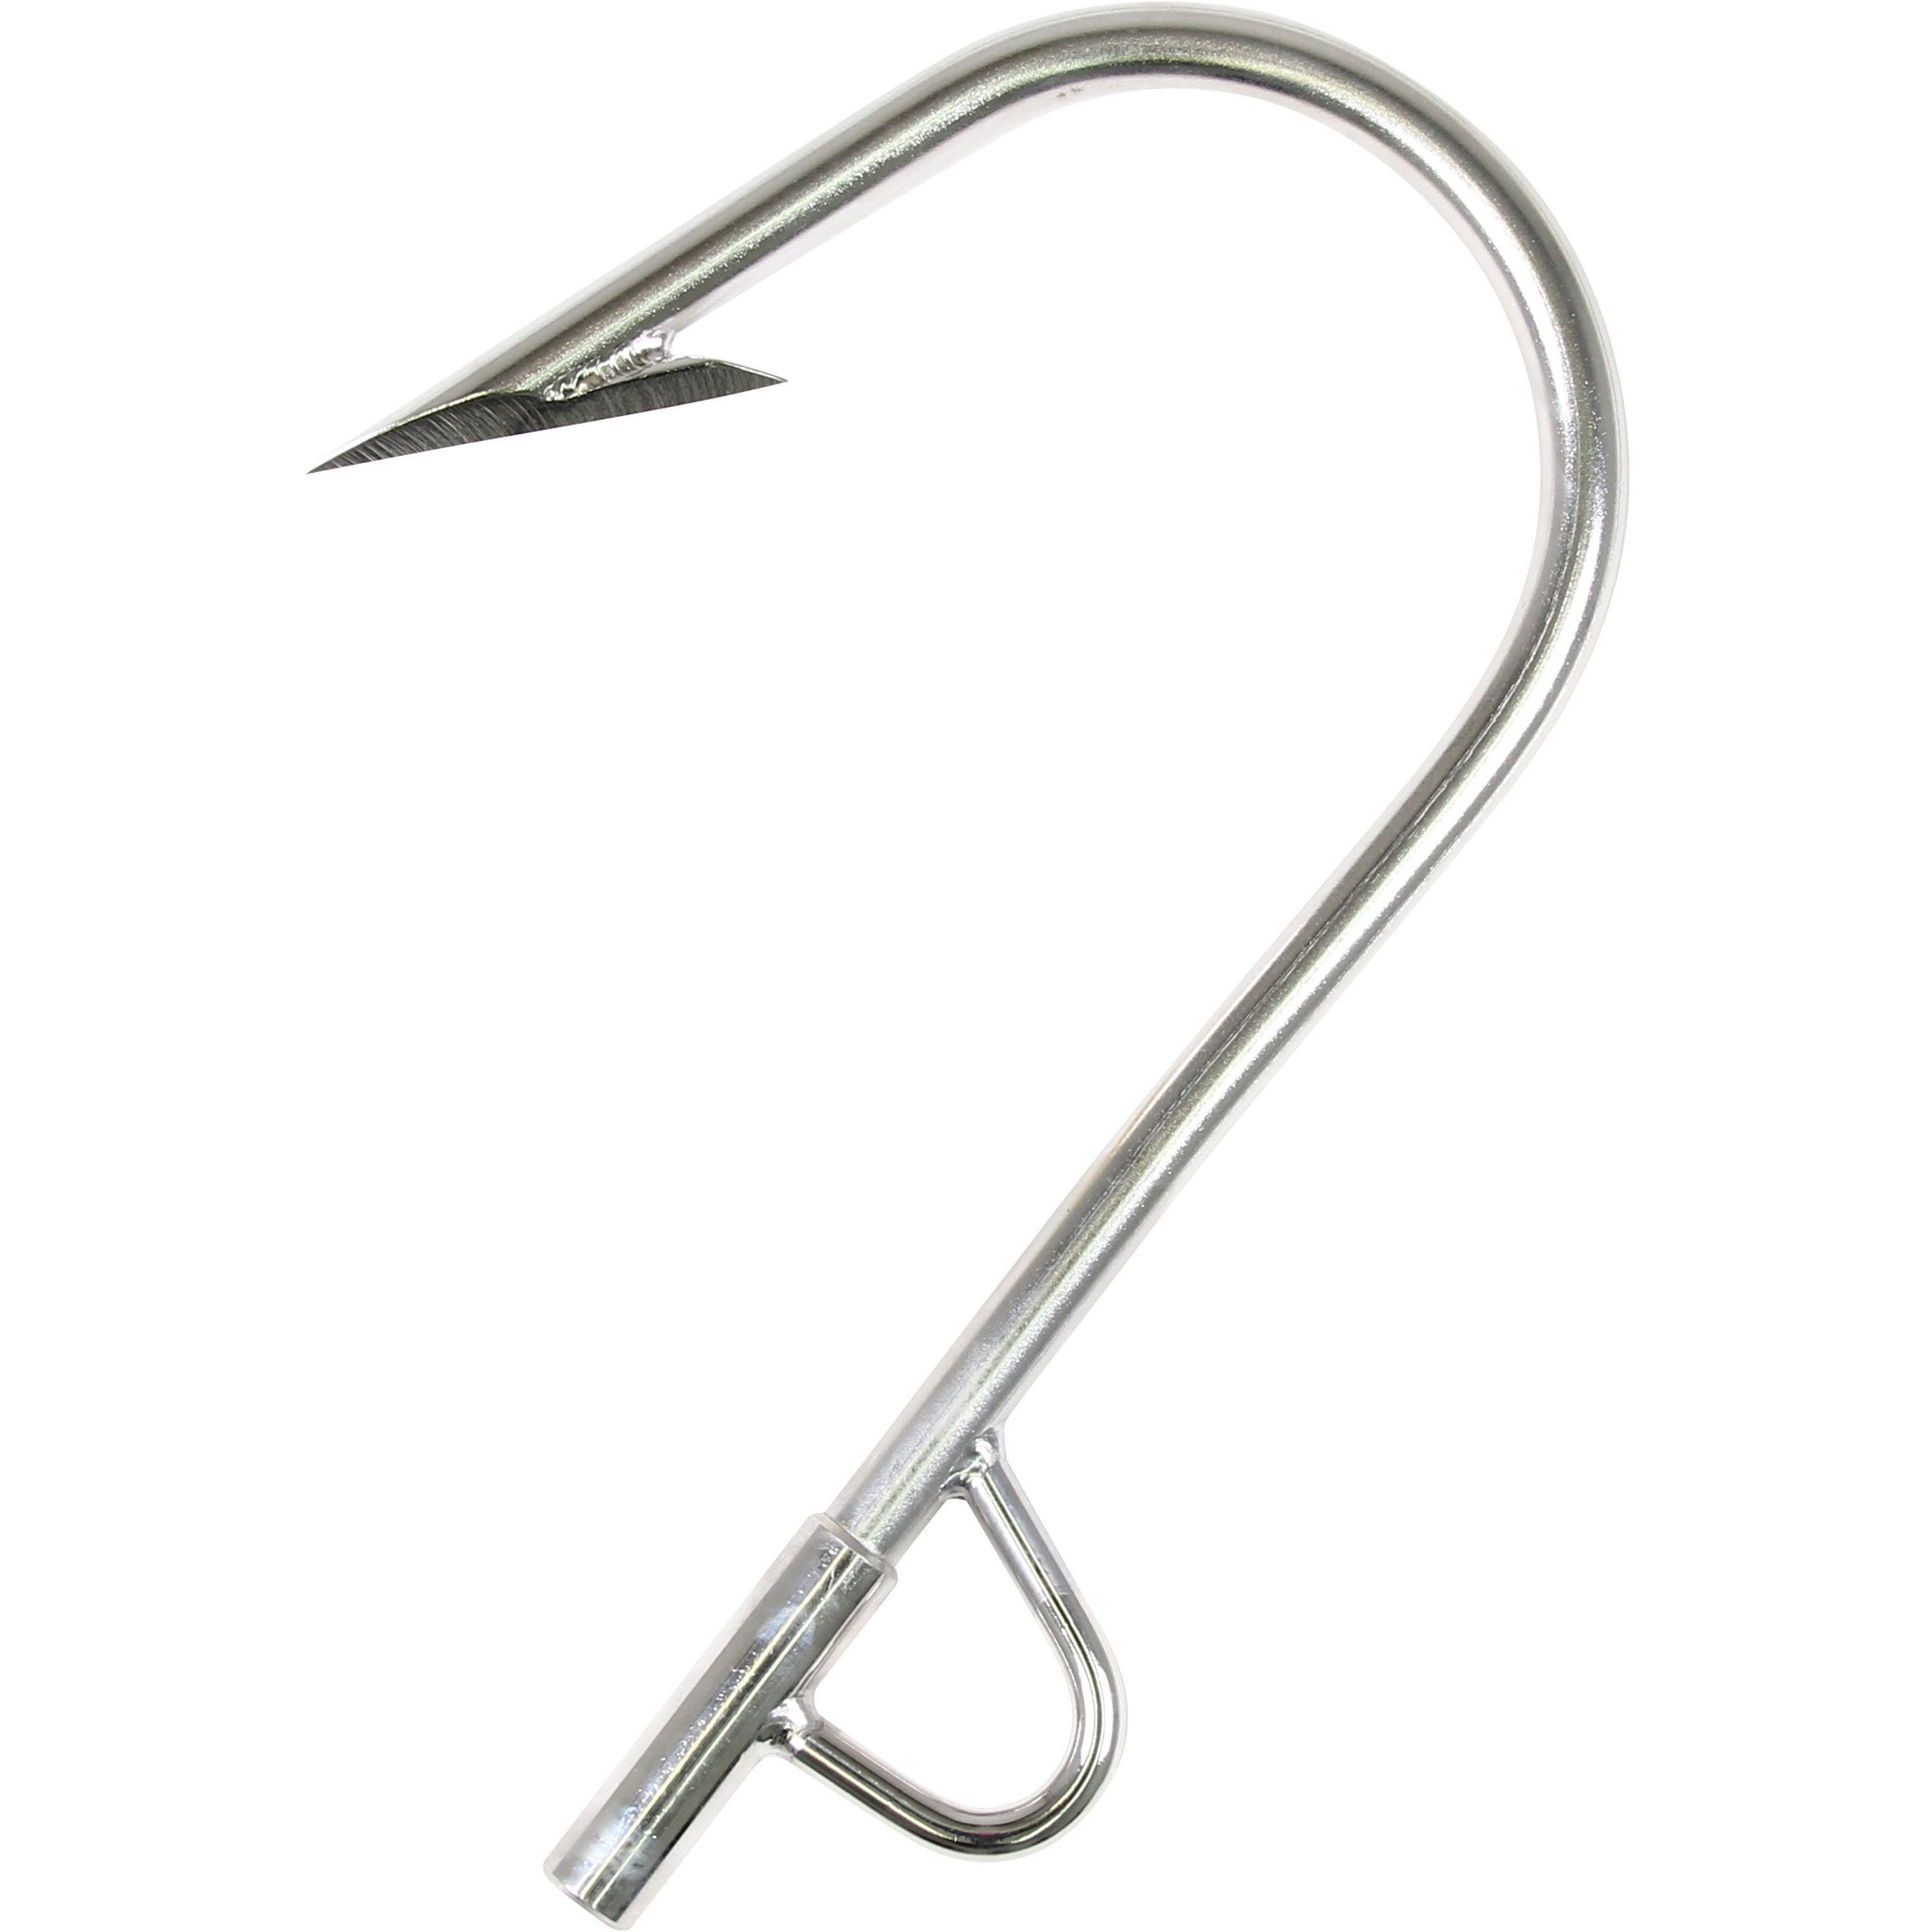 Aftco 6 Feet Gold Anodized Aluminum Fishing Gaff - 3 Inch Hook Throat